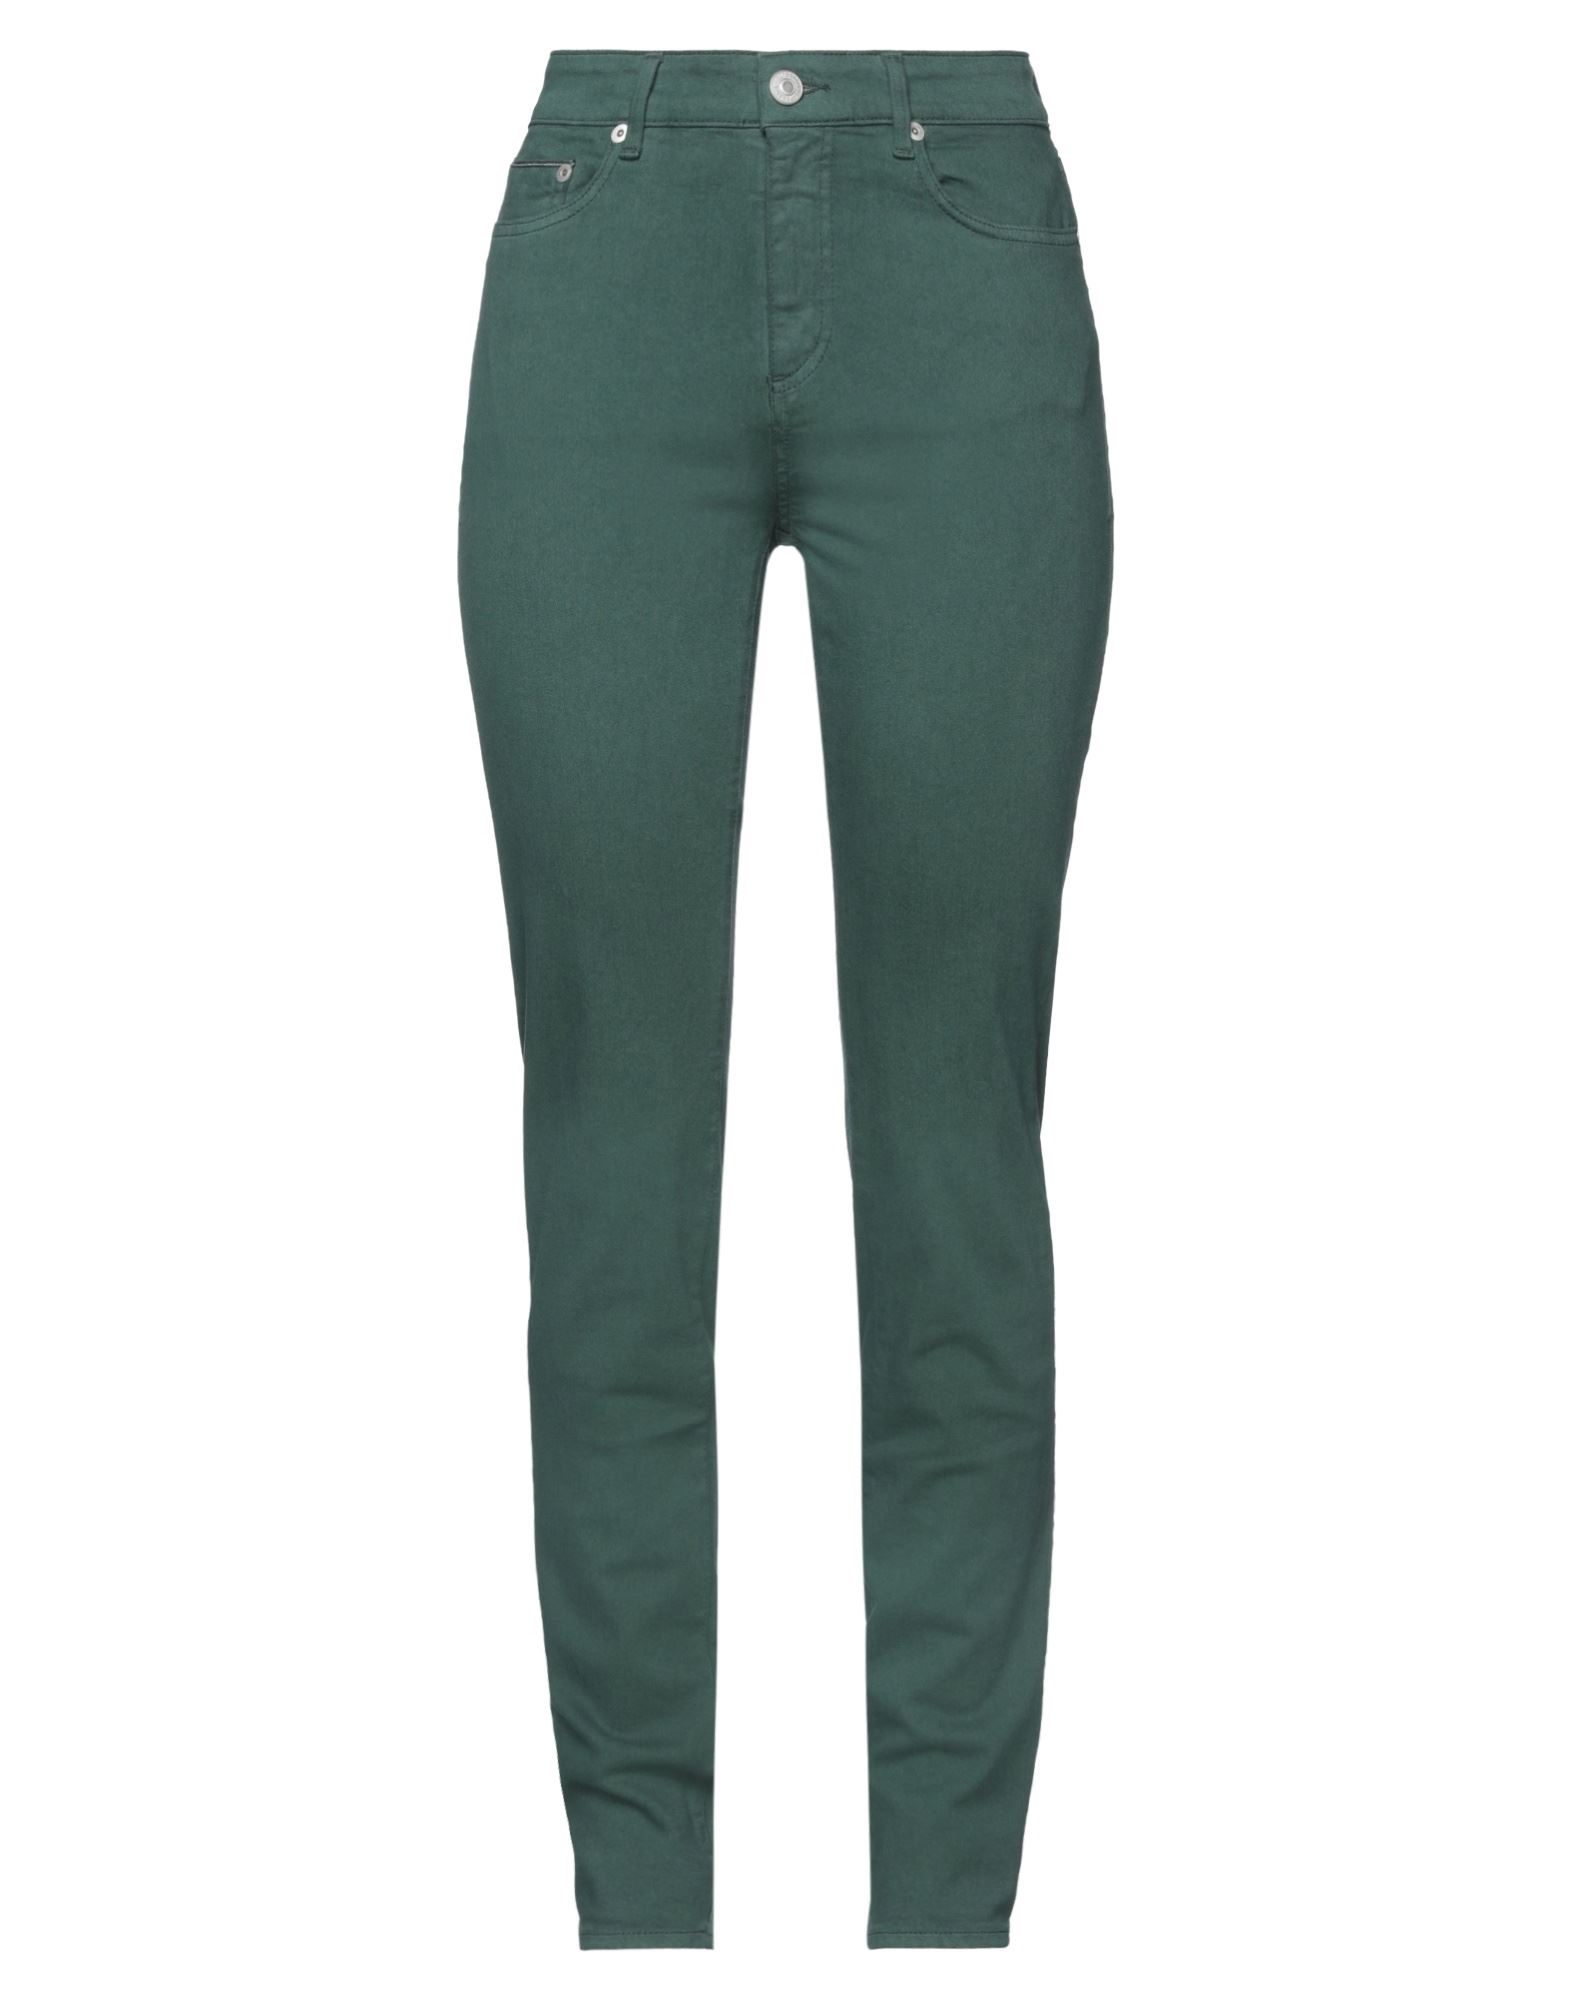 Care Label Jeans In Green | ModeSens